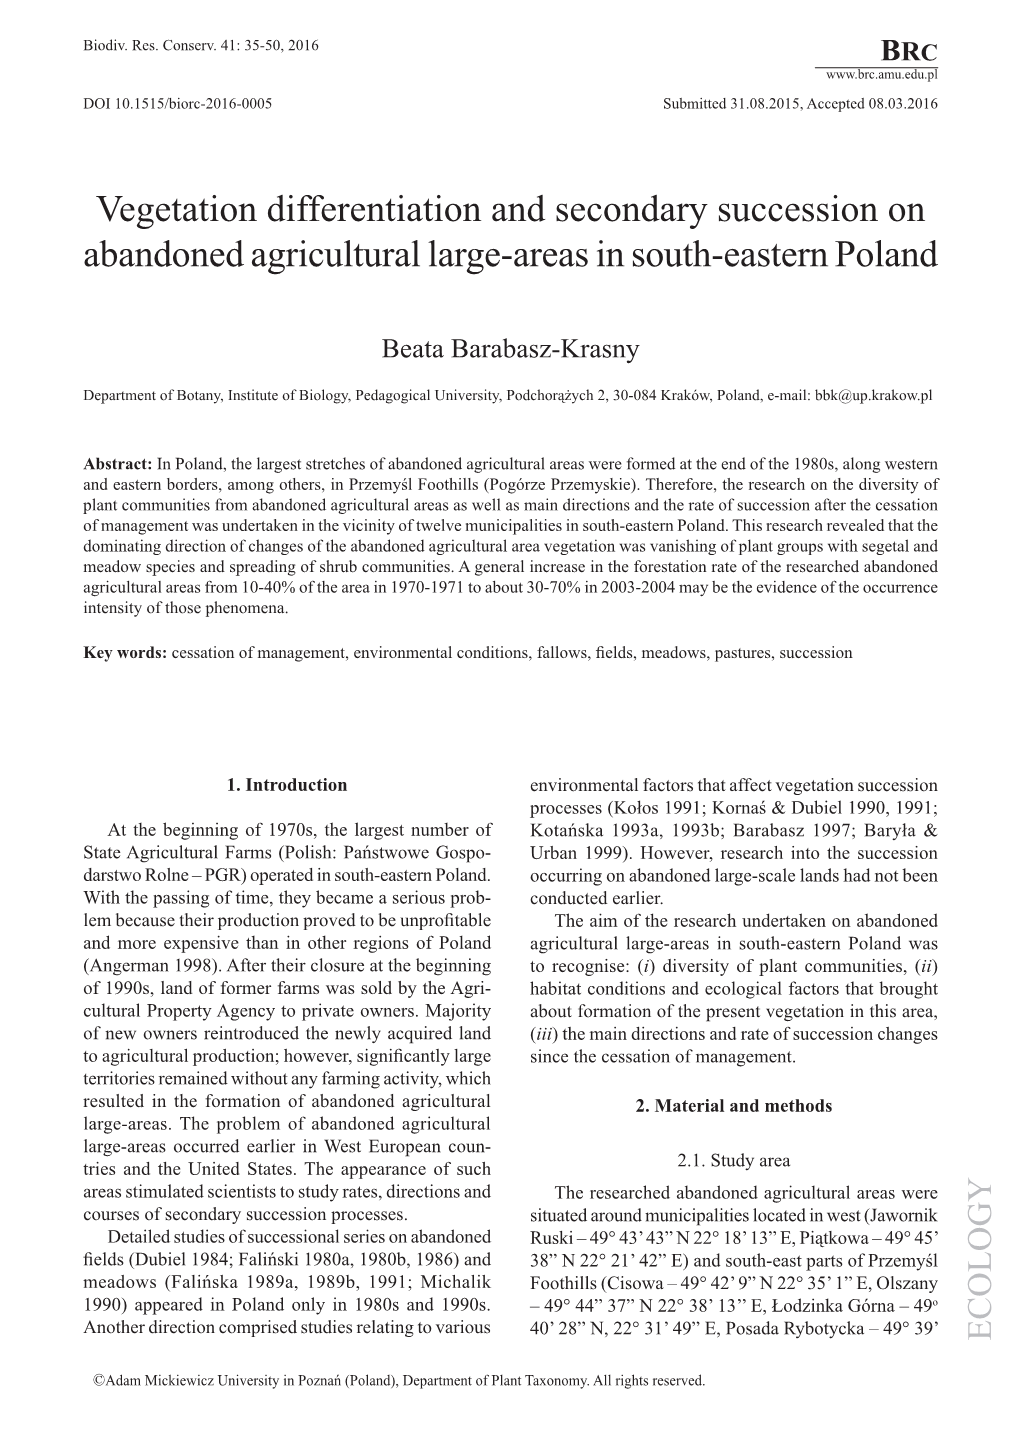 Vegetation Differentiation and Secondary Succession on Abandoned Agricultural Large-Areas in South-Eastern Poland